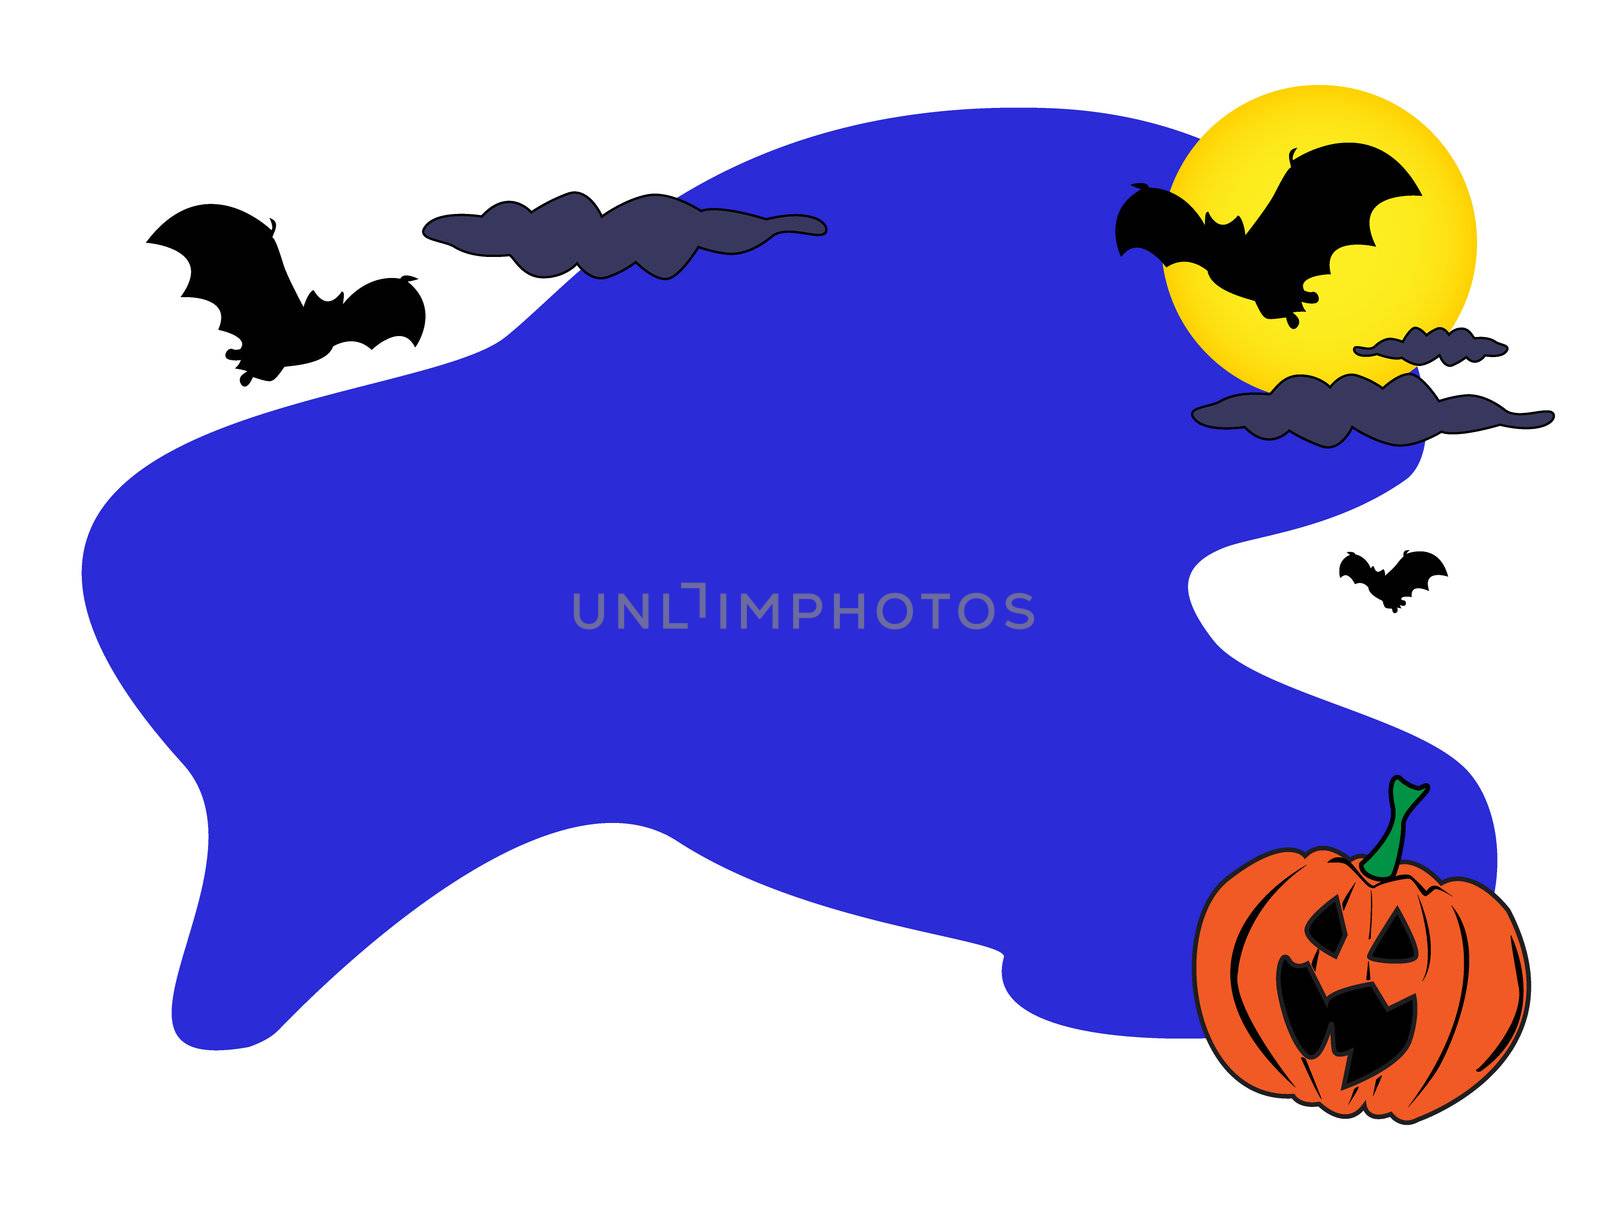 Fun halloween cartoon background card with ample room for your text.